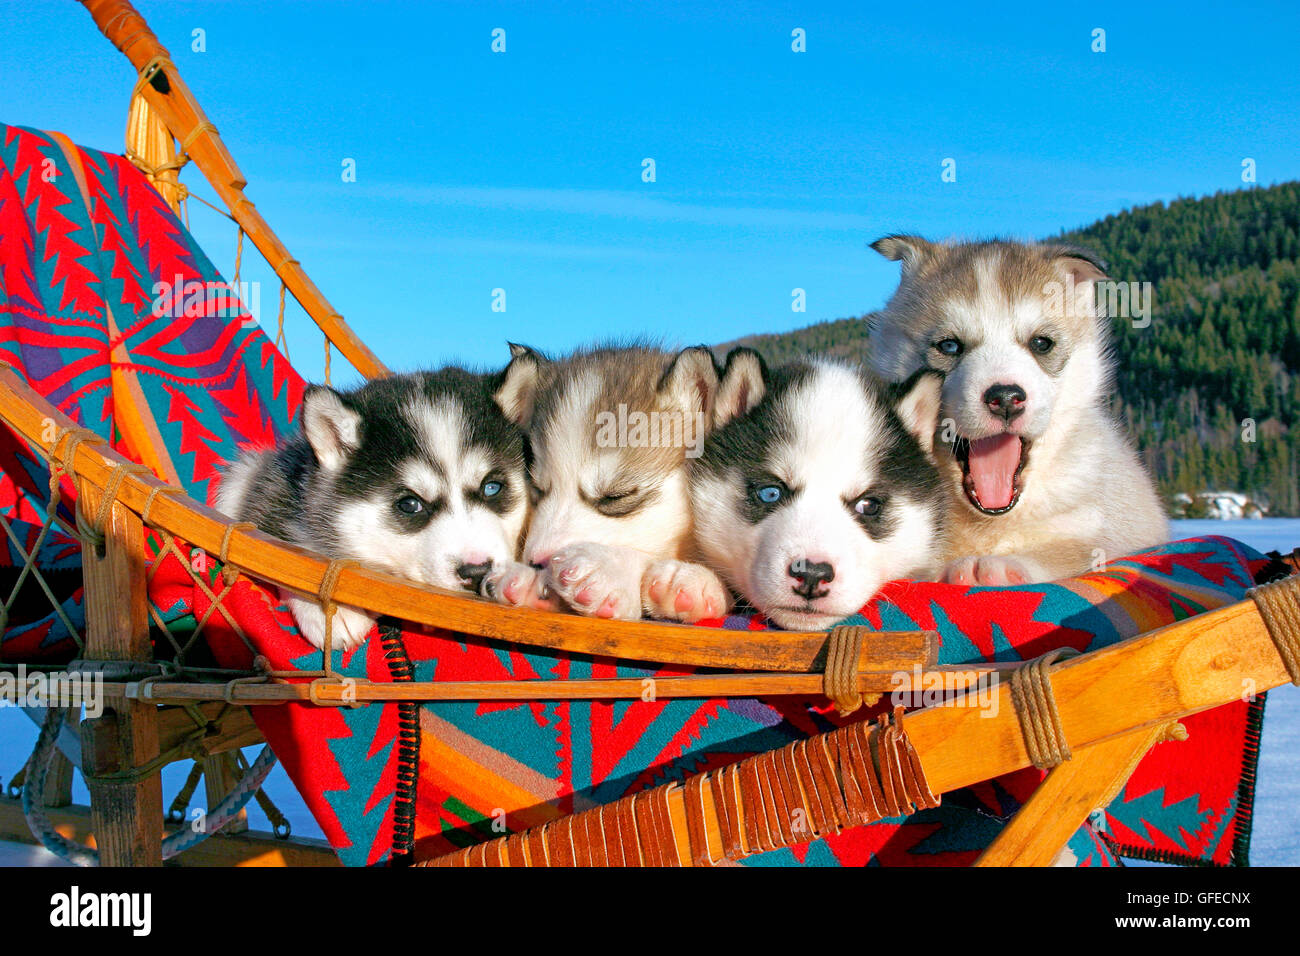 Siberian Husky, four puppies together in sleigh Stock Photo